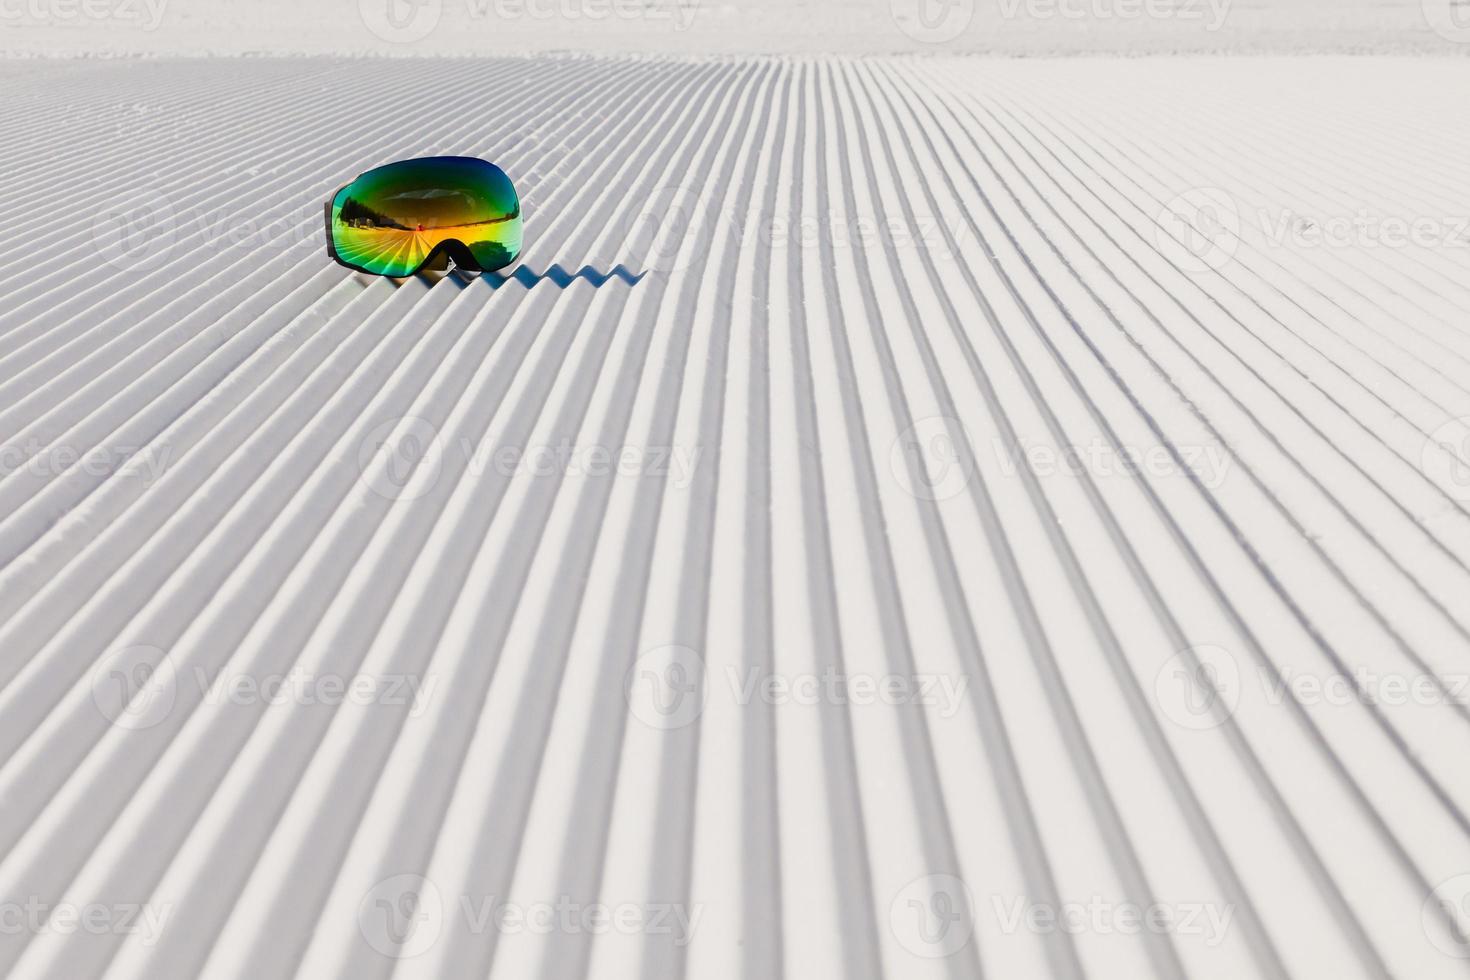 Ski goggles laying on a new groomed snow and empty ski slope photo